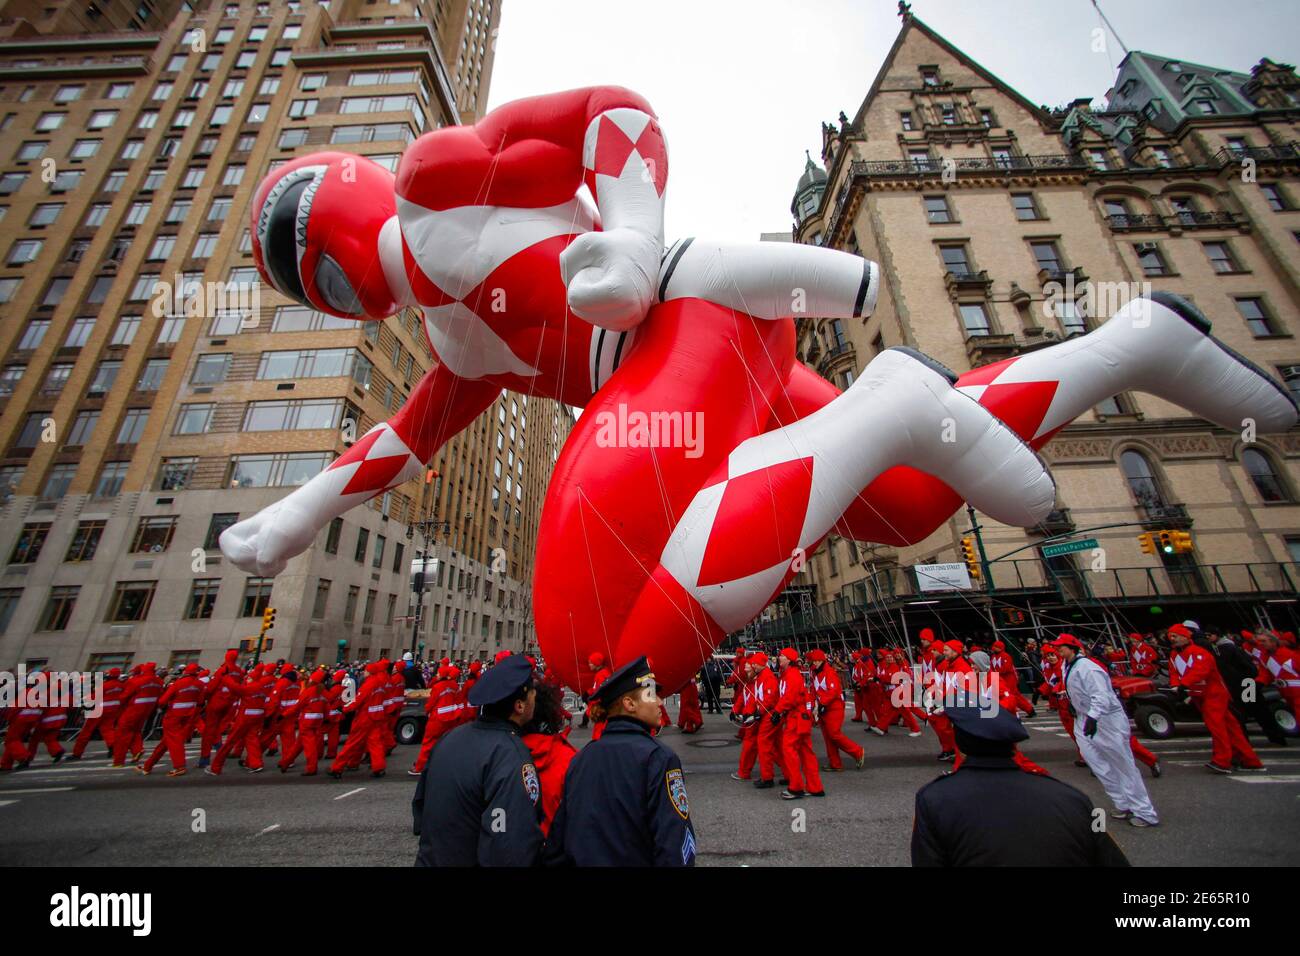 The red Mighty Morphin Power Ranger floats down Central Park West during 88th Macy's Thanksgiving Day Parade in New November 27, REUTERS/Eduardo Munoz (UNITED STATES - Tags: SOCIETY Stock